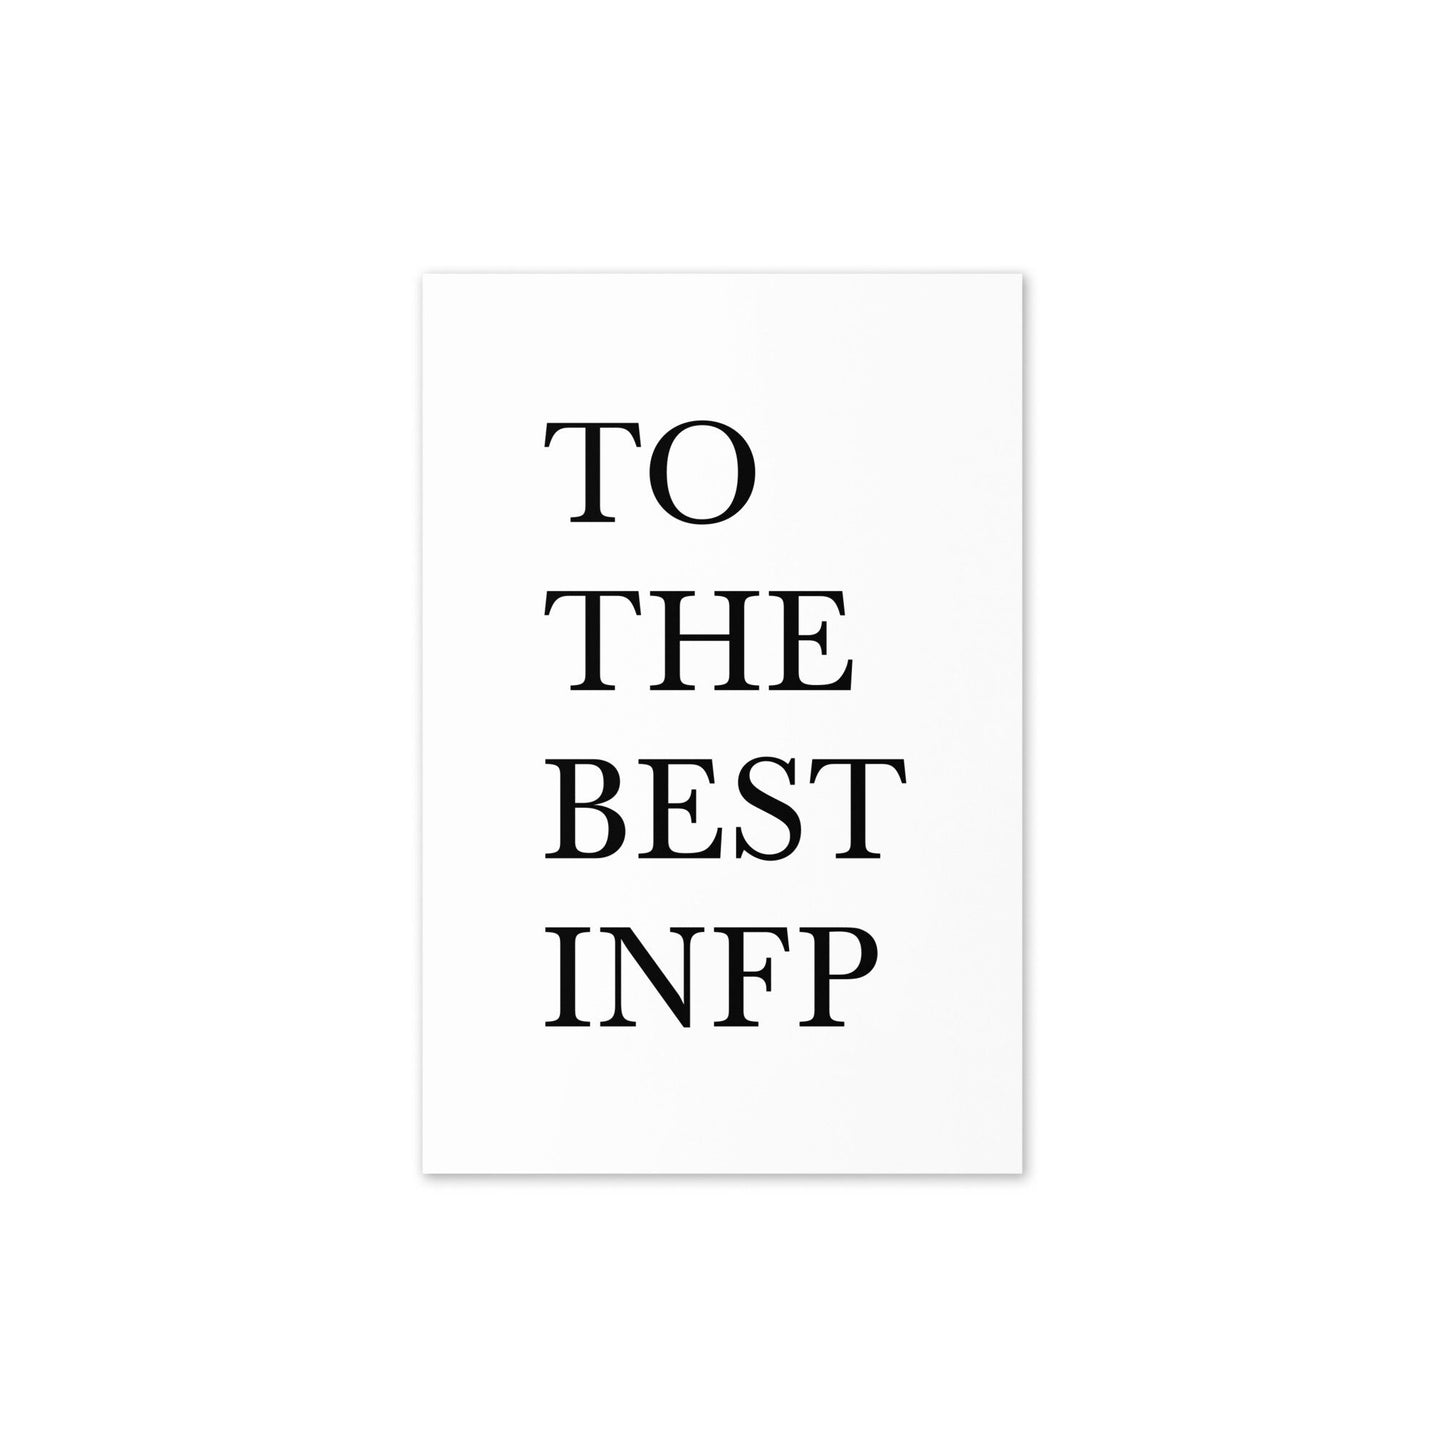 To The Best INFP Greeting Card, MBTI, Personality Type